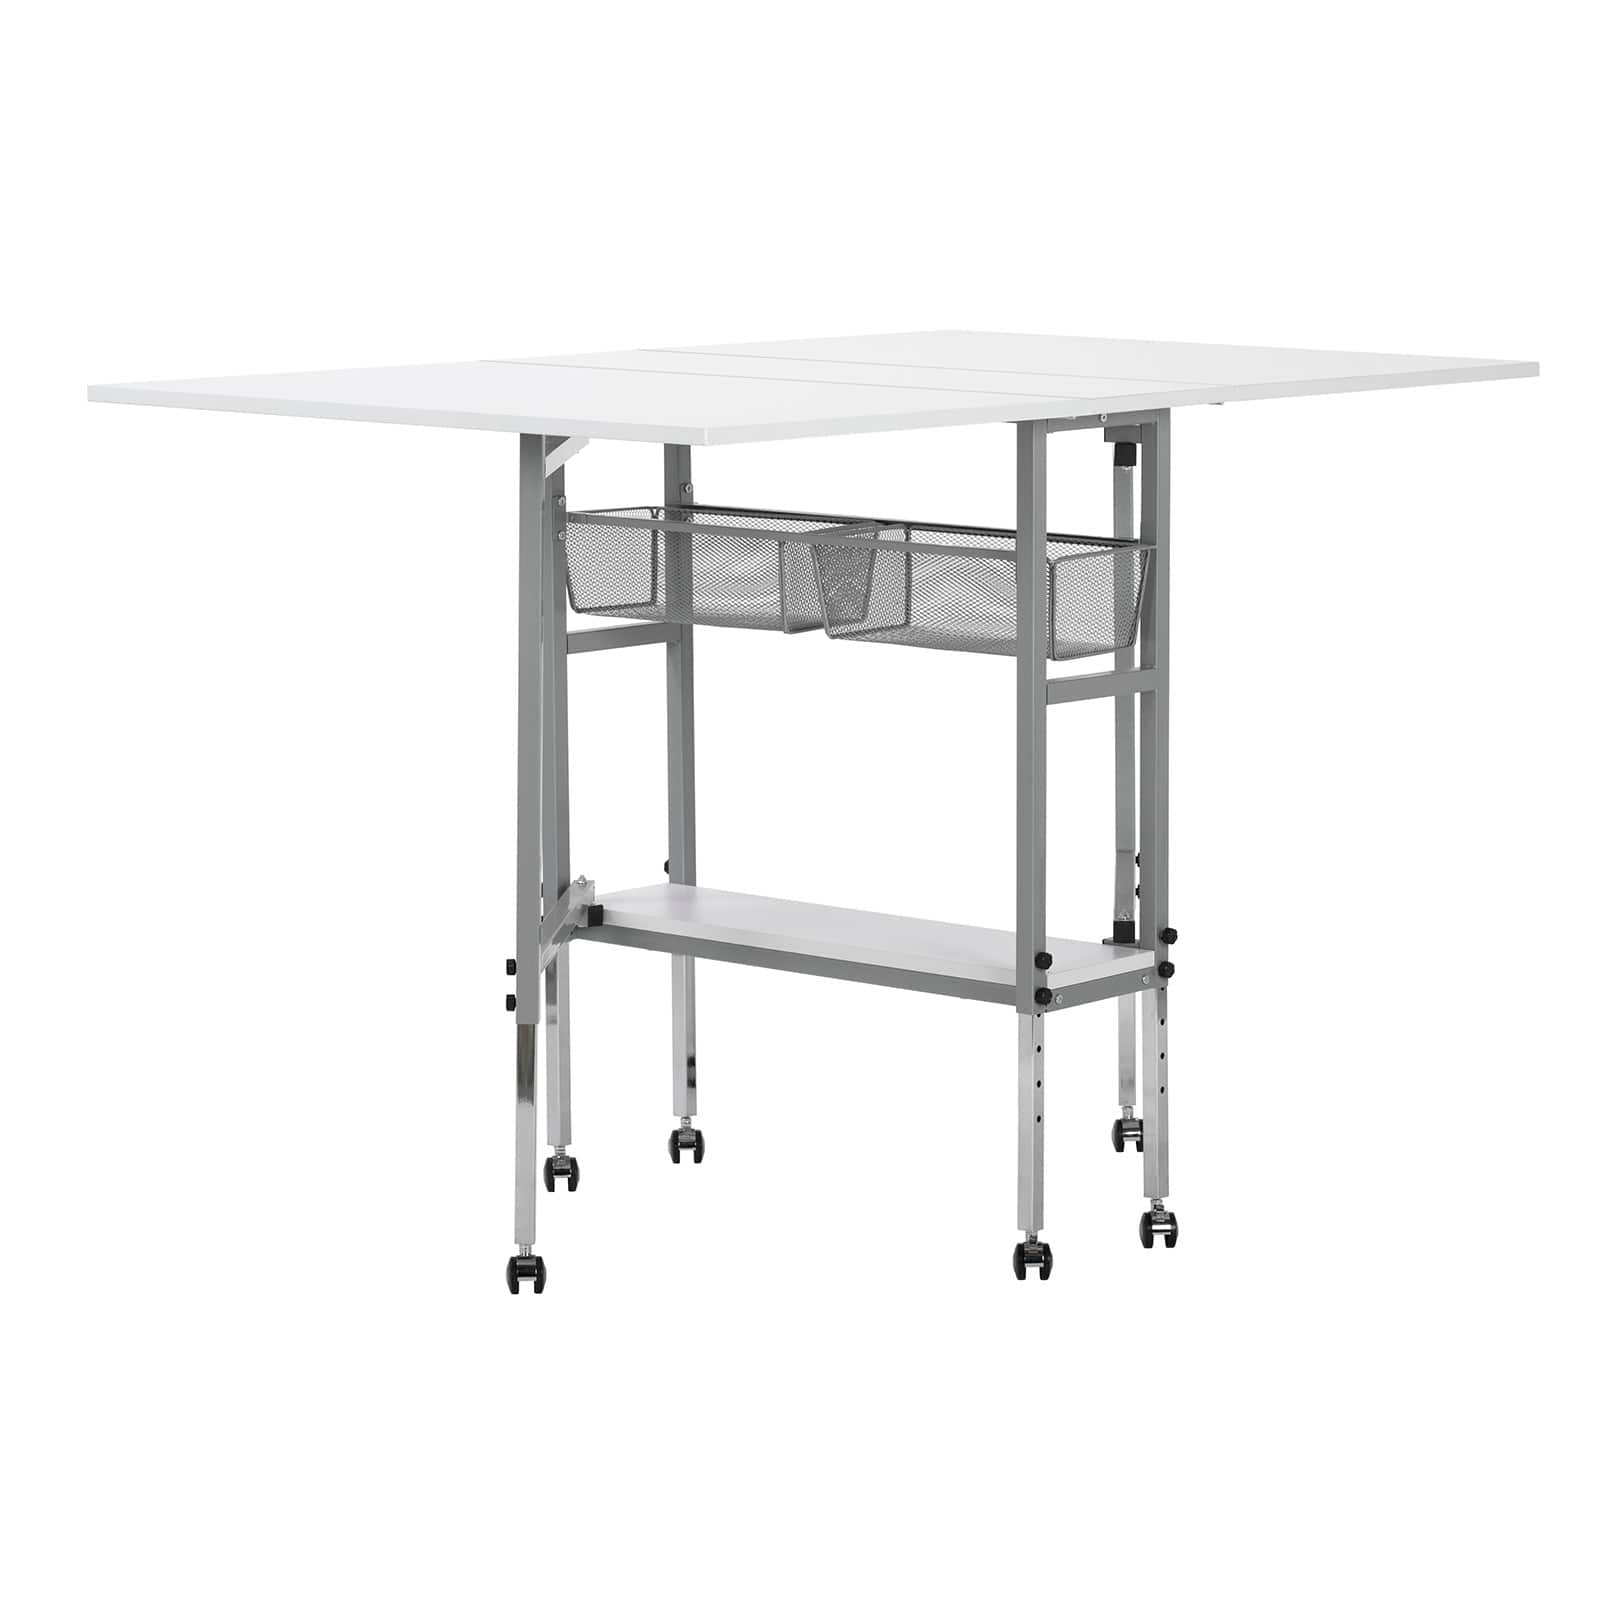 58.75'' x 36.5'' Foldable Sewing Table Offer Storage for Sewing or